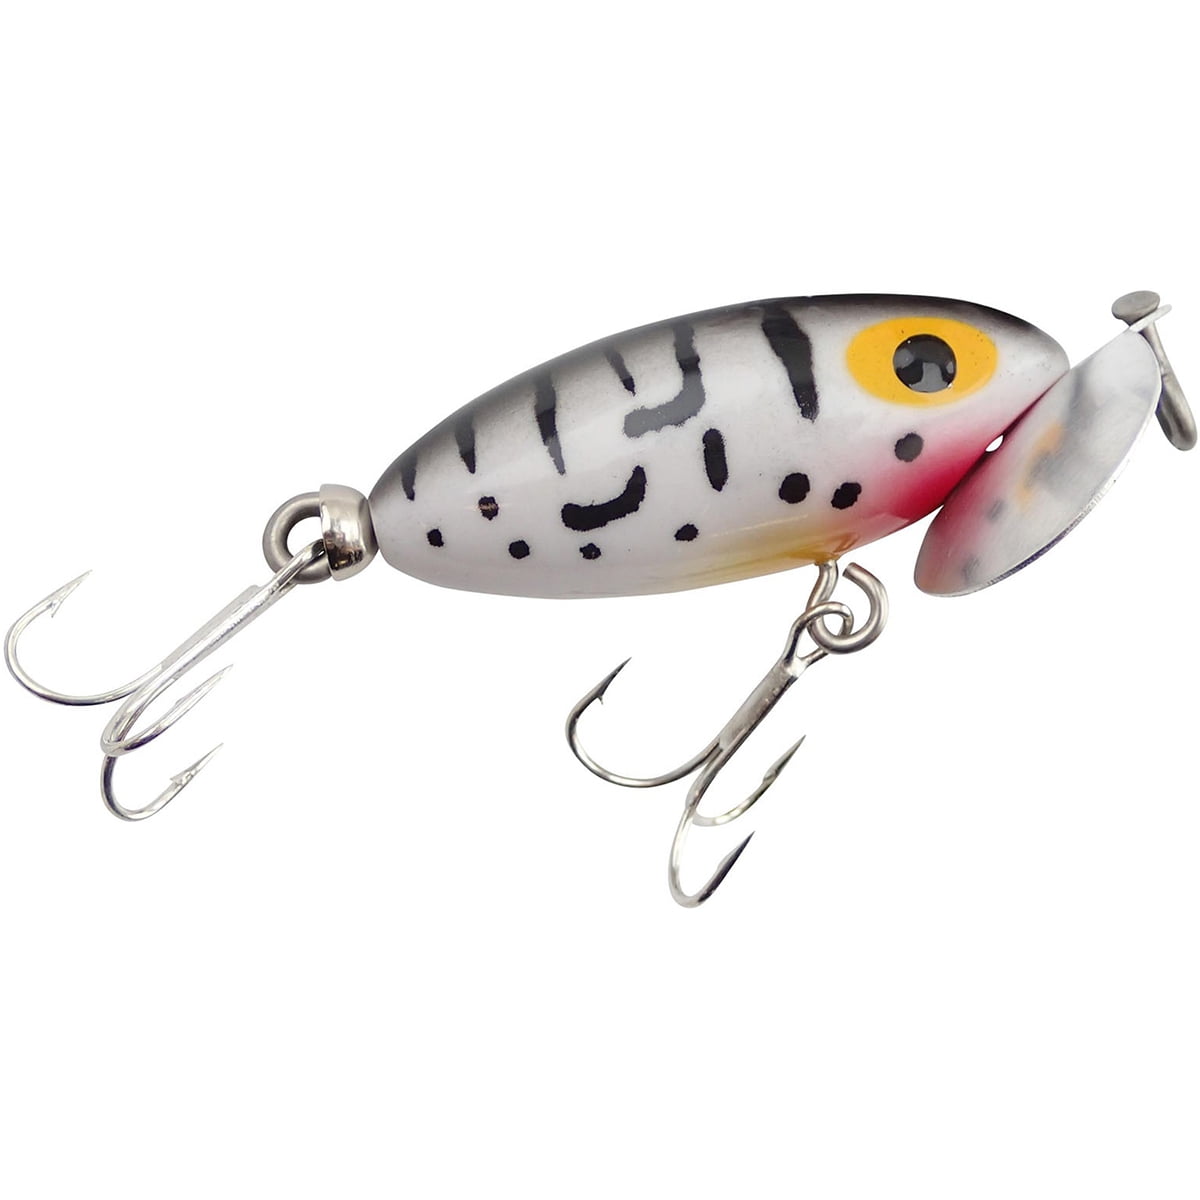 ARBOGAST JITTERBUG 2004 Trout Bass Fishing Surface Lure $15.00 - PicClick AU